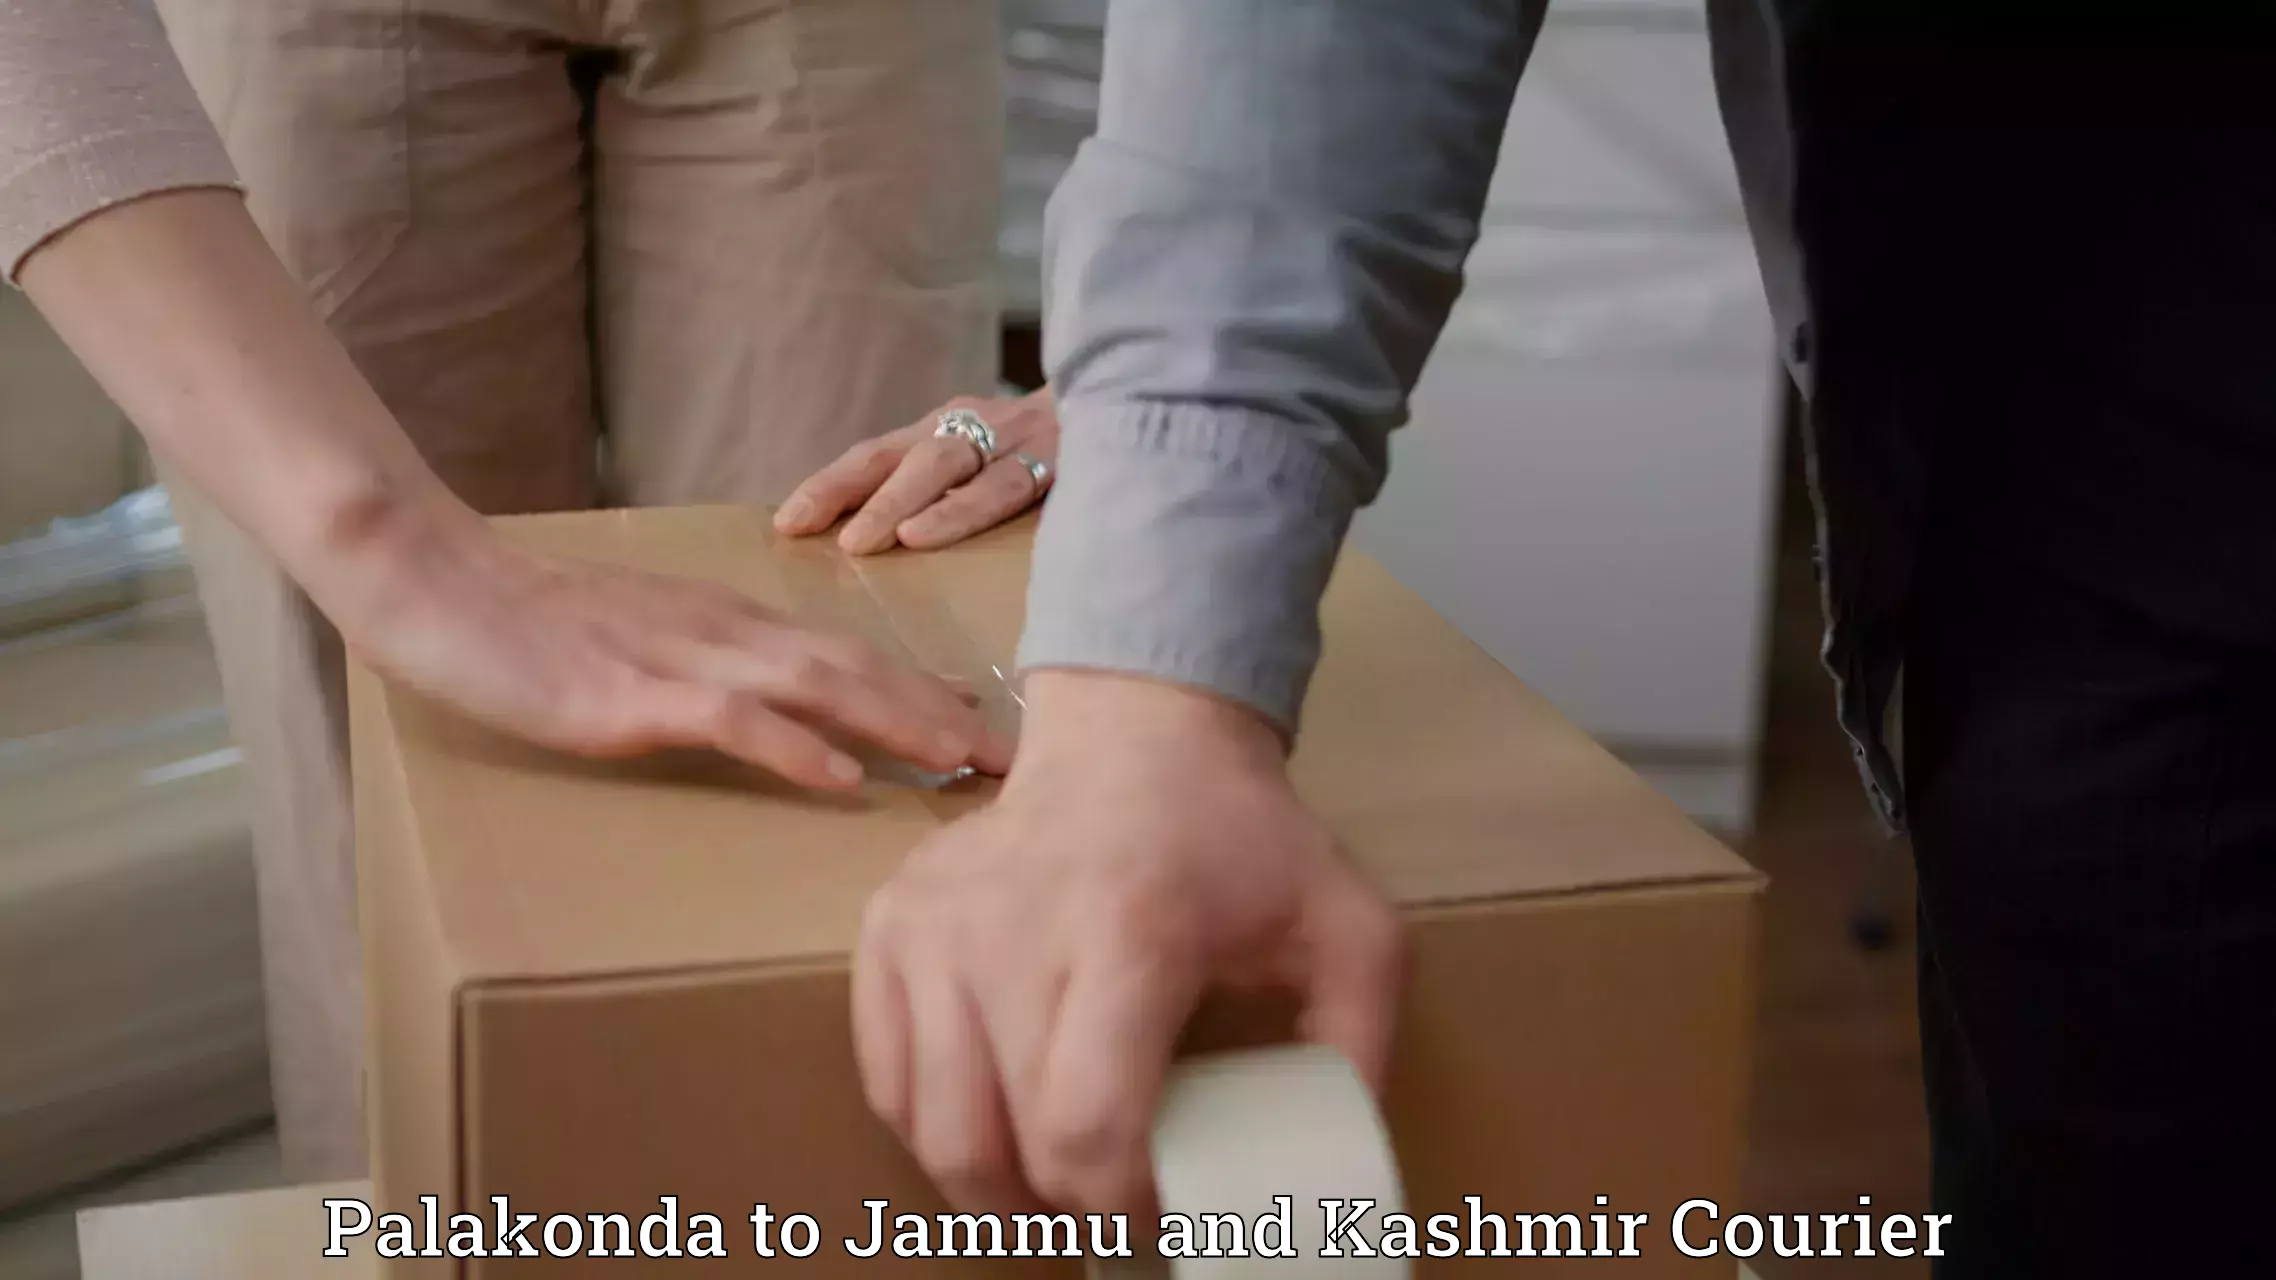 Easy access courier services Palakonda to Jammu and Kashmir